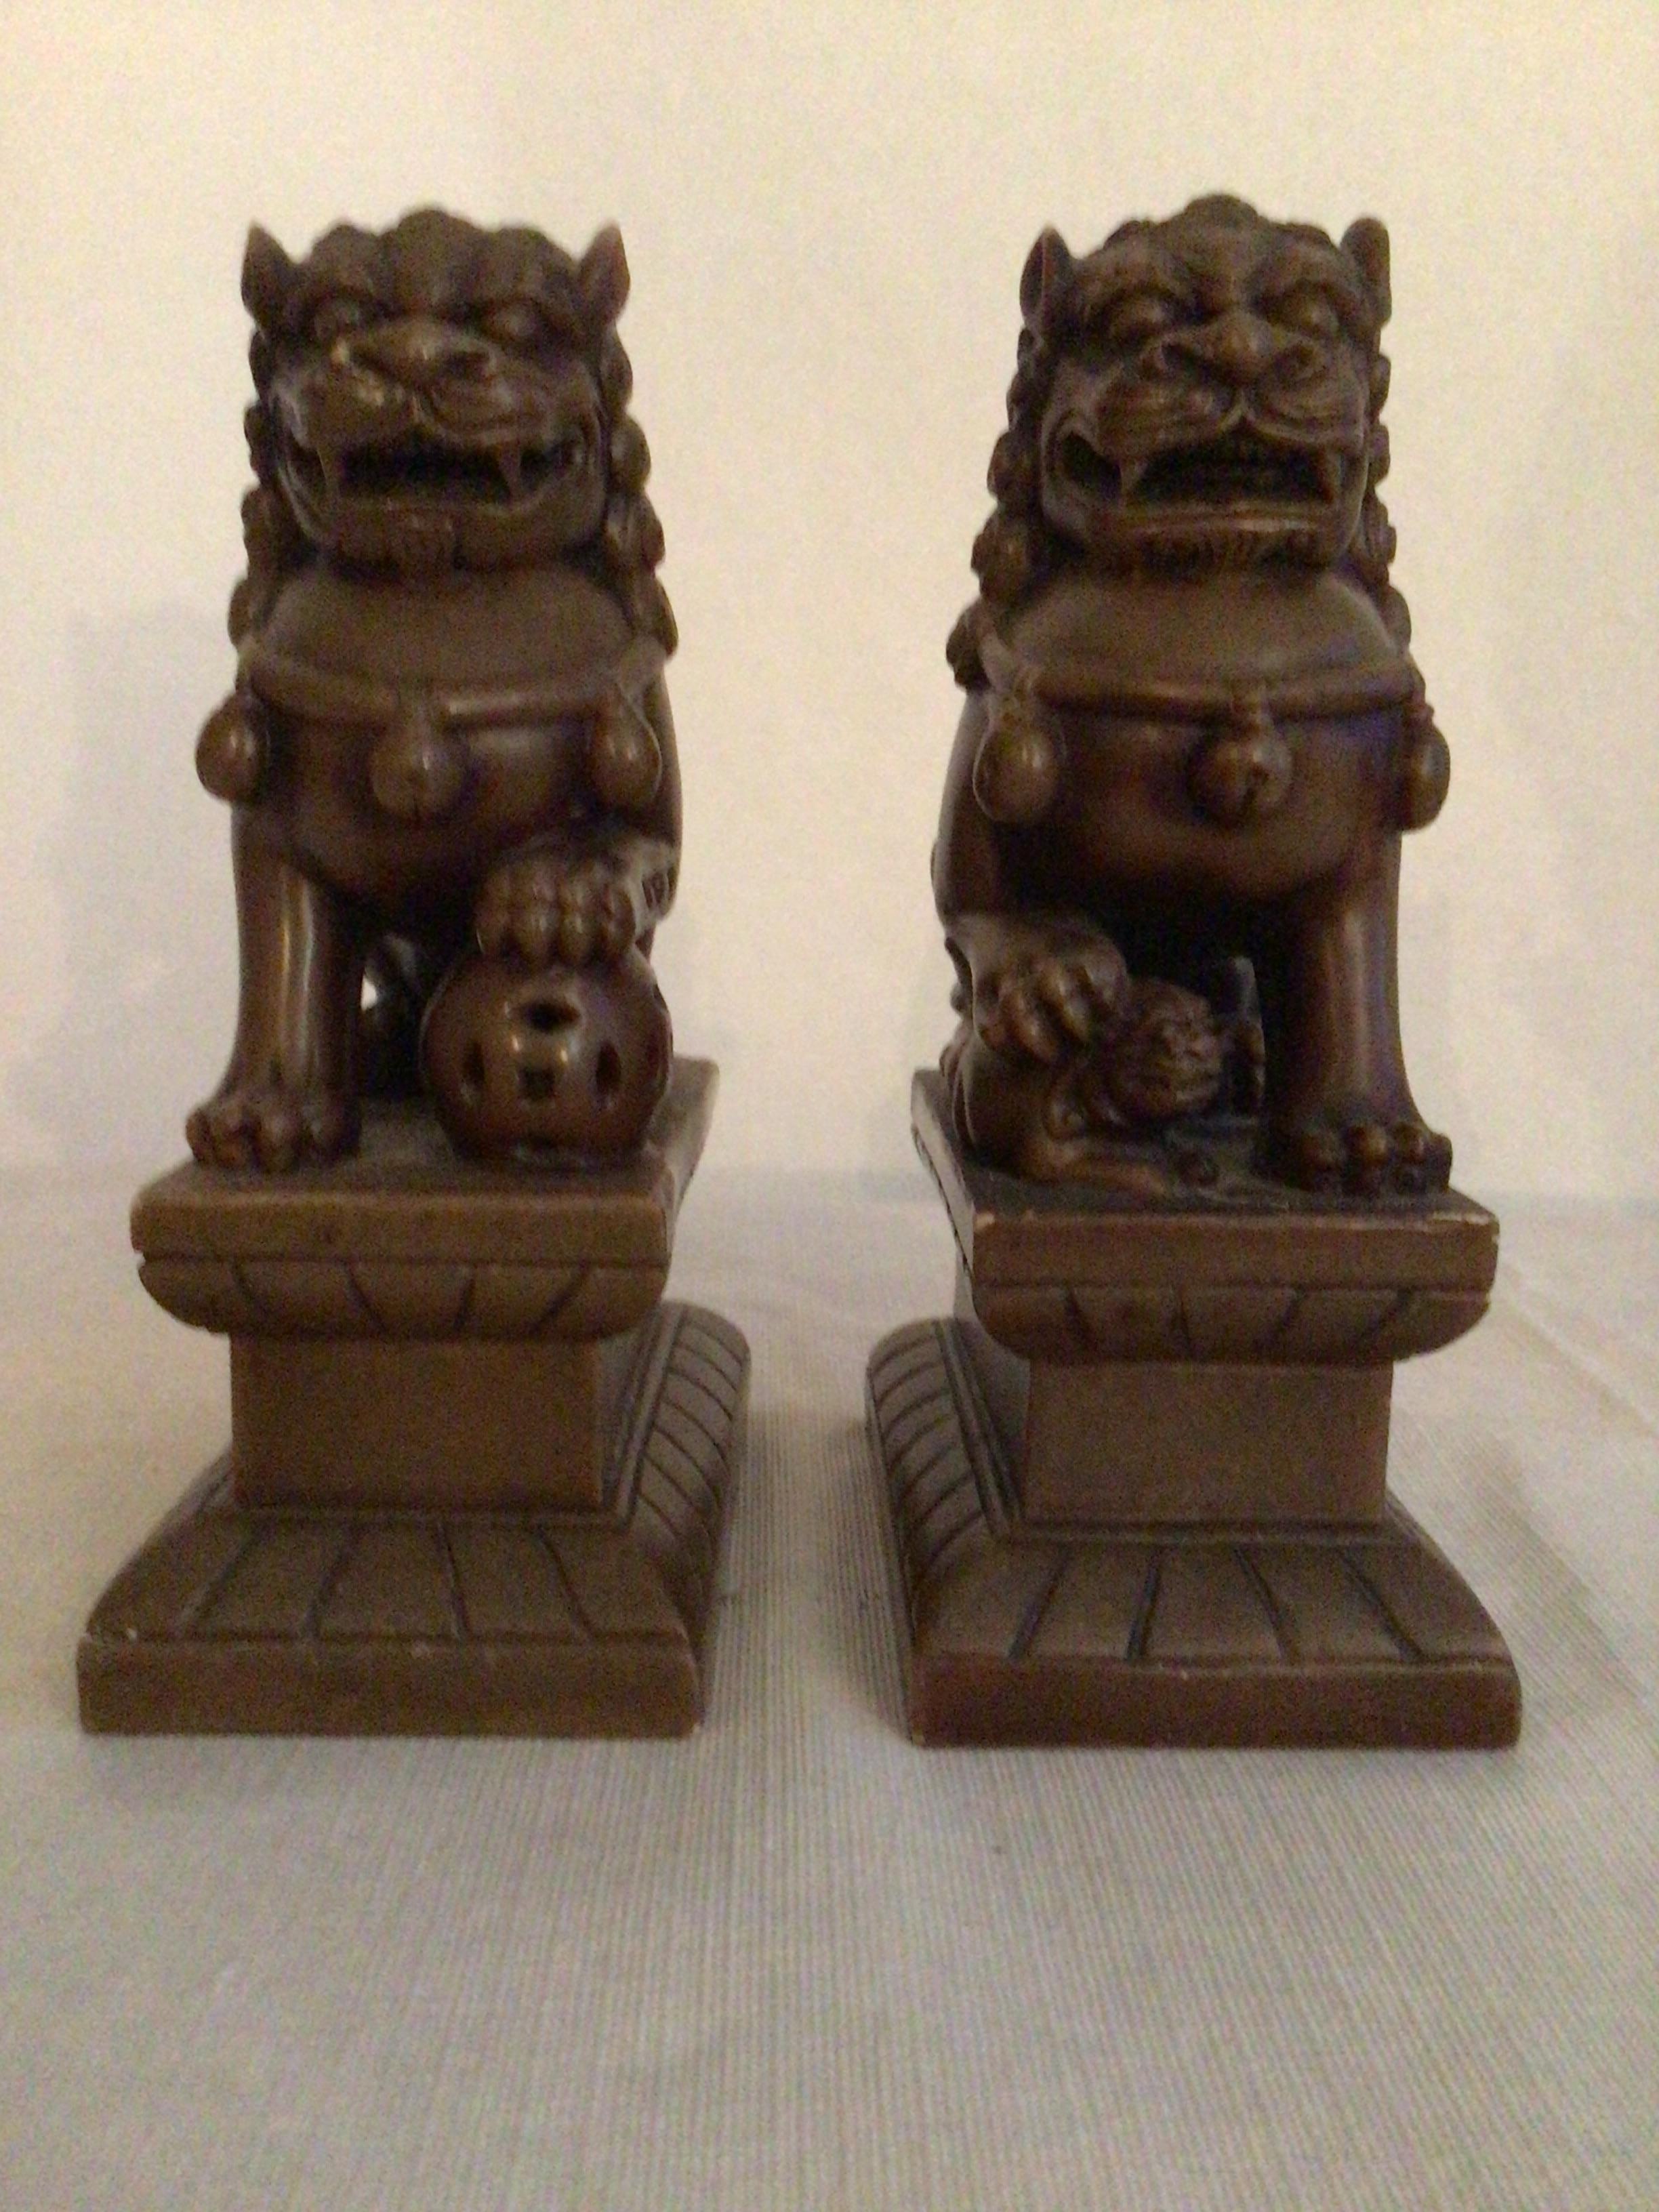 Pair of 1950s carved soapstone Foo dogs each one uniquely different.